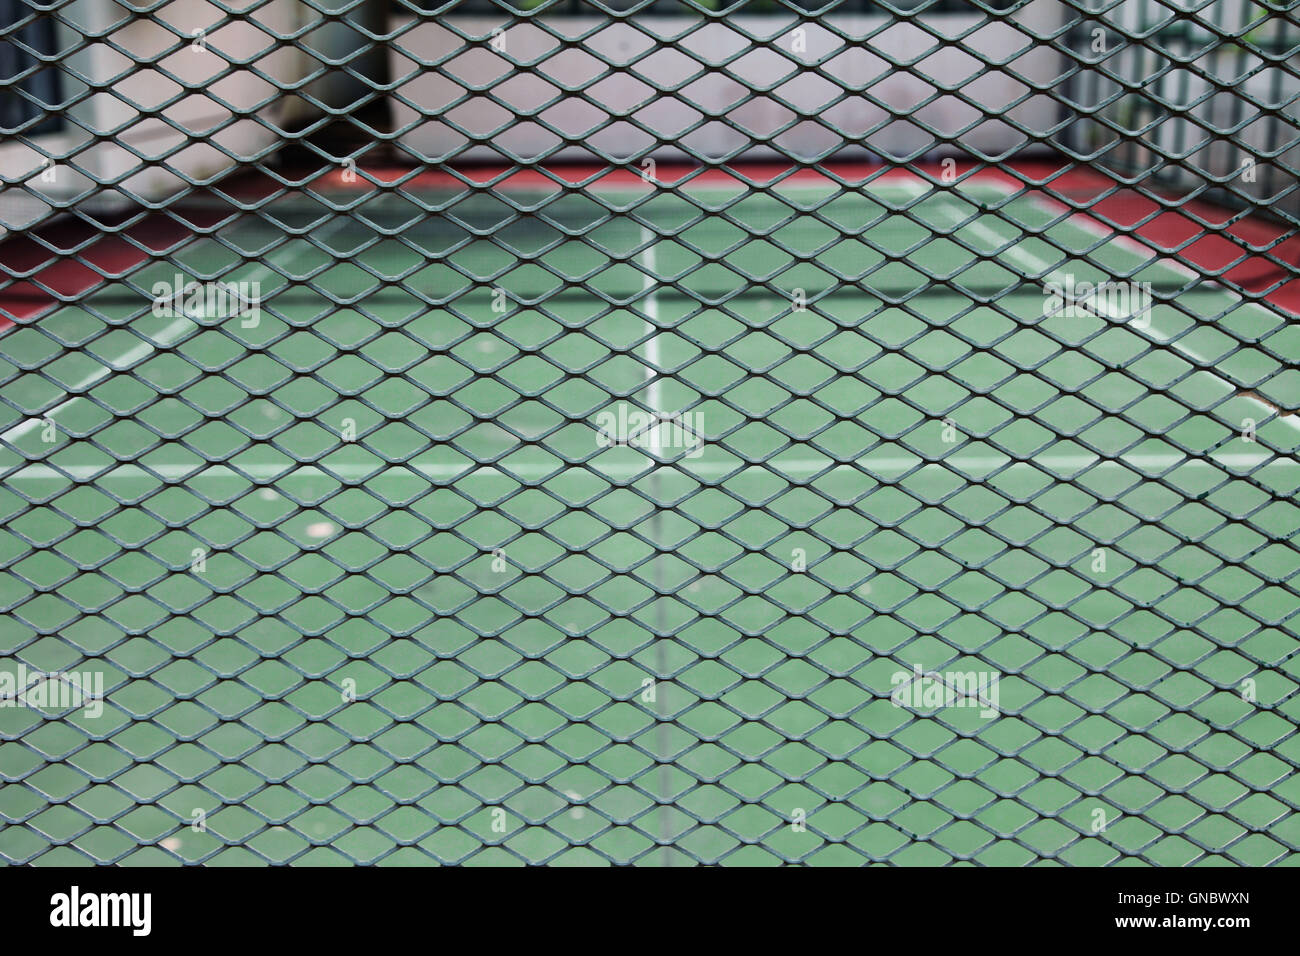 Tennis court behind a grid fence or metal mesh Stock Photo